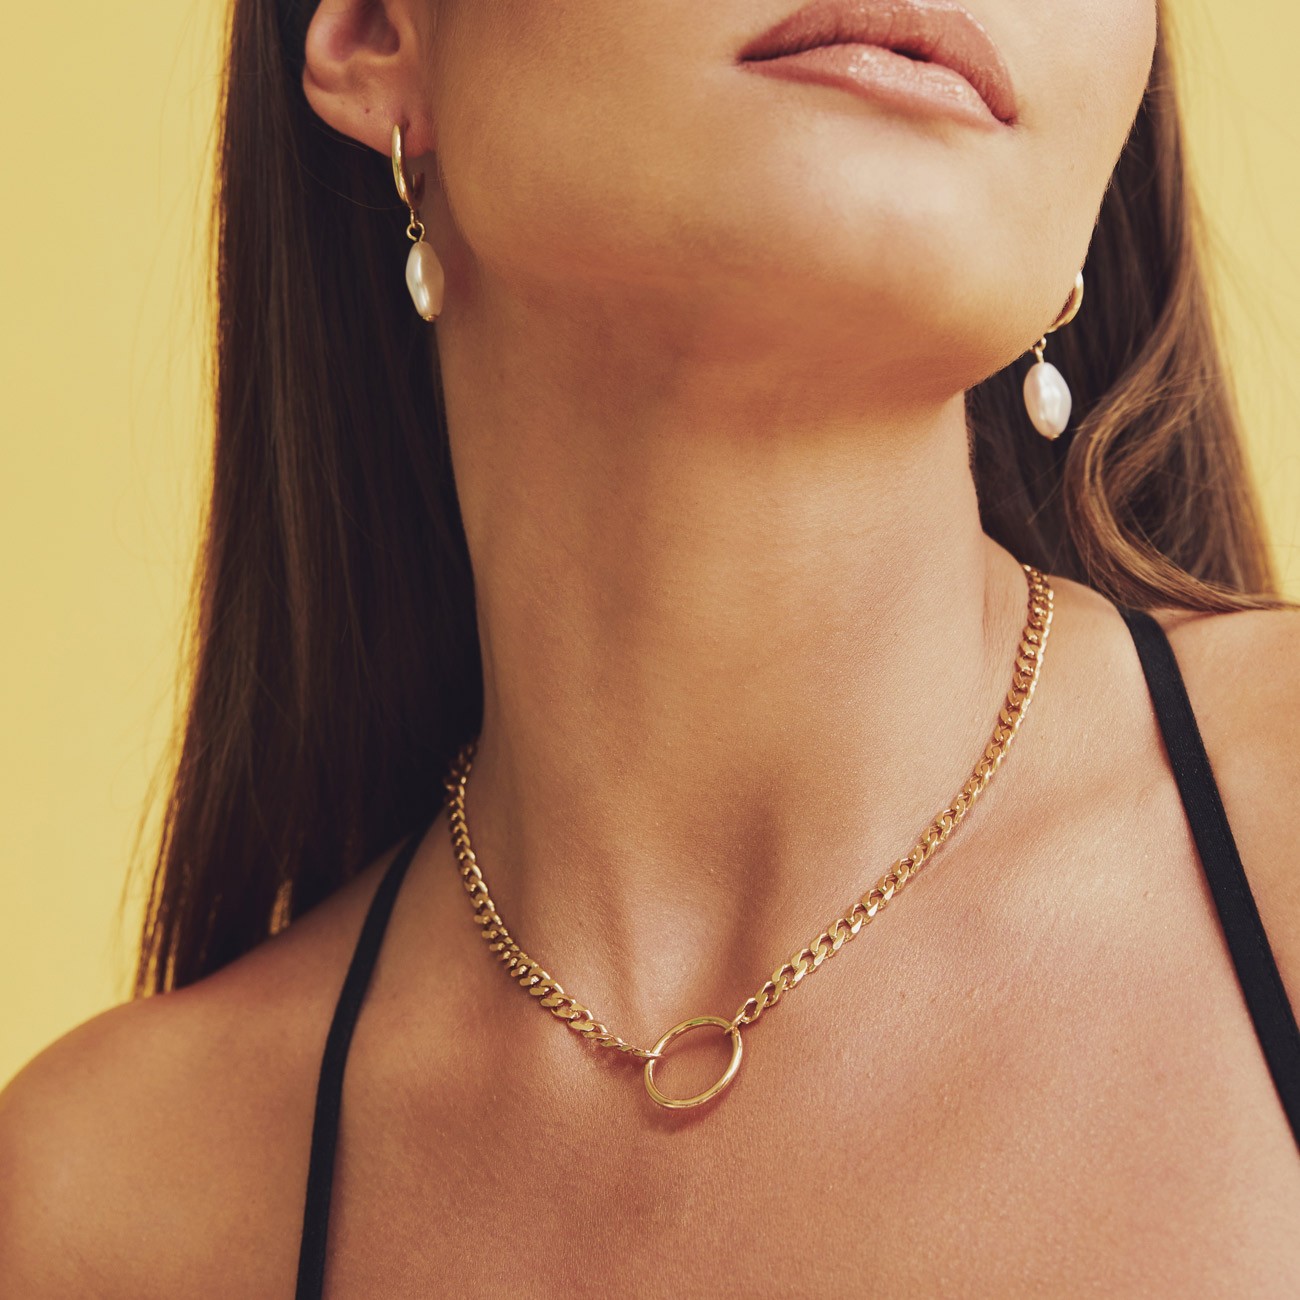 Choker necklace with a pearl pendant